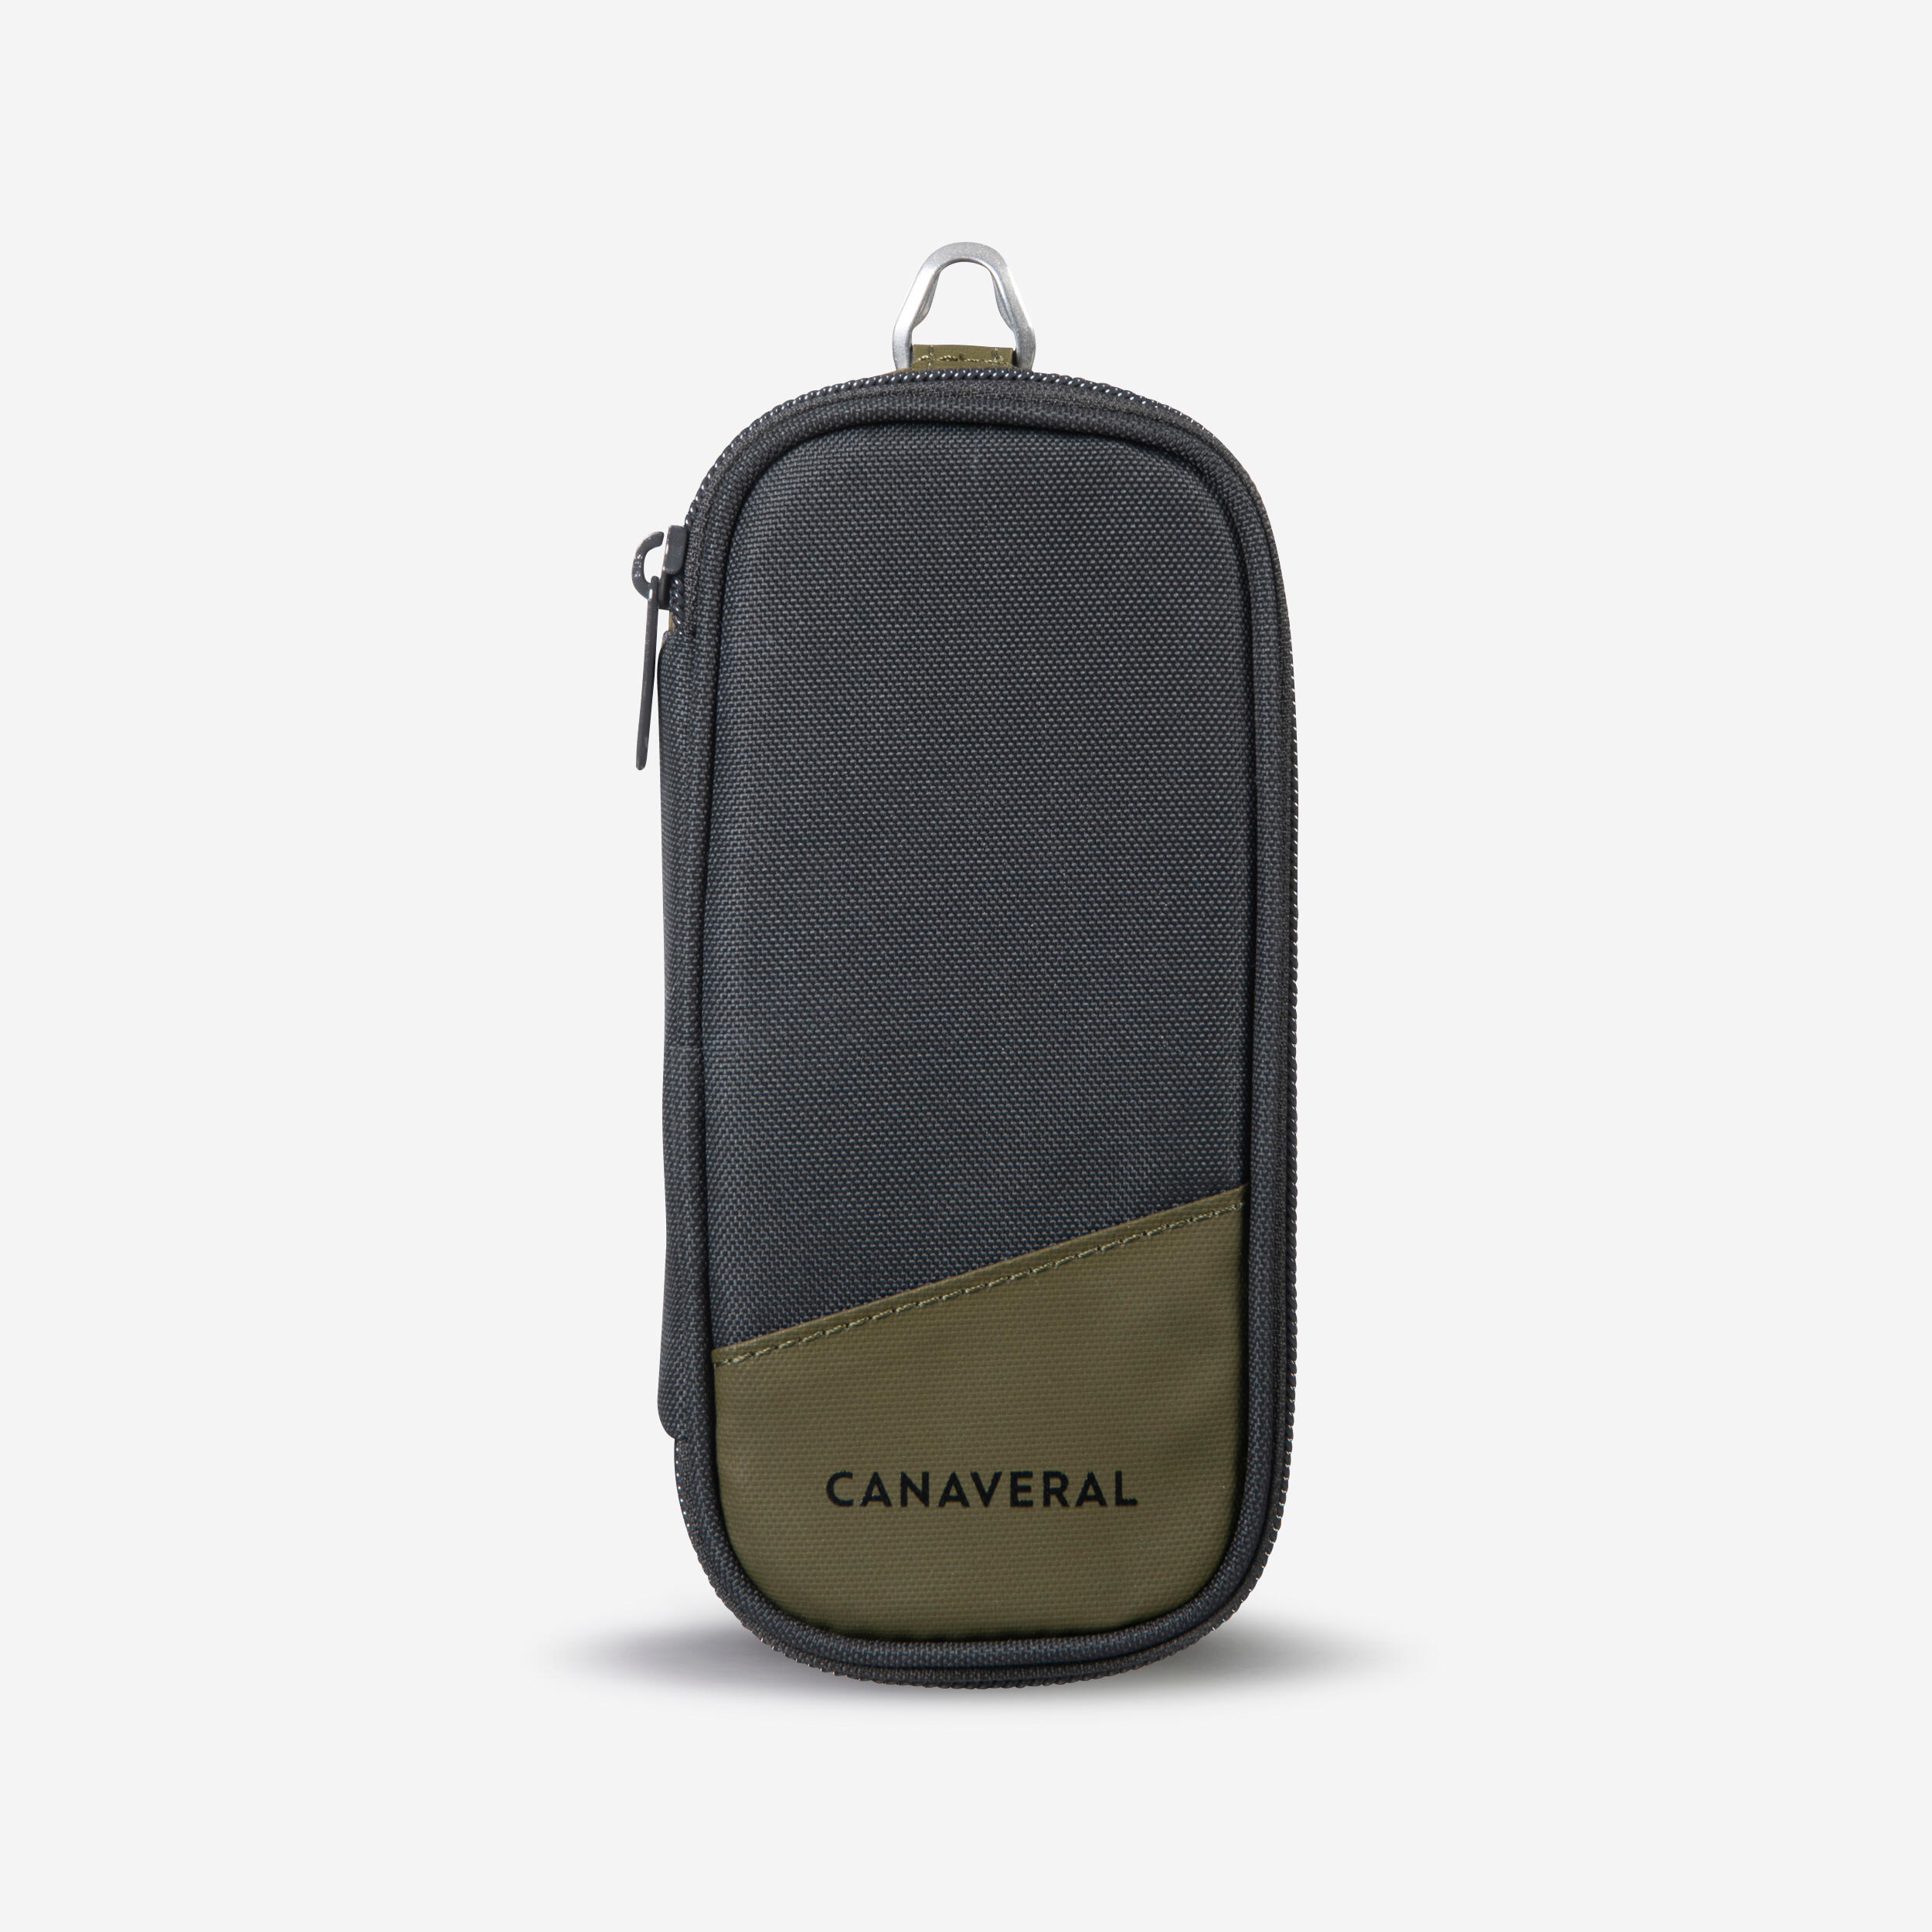 Dart case - CANAVERAL